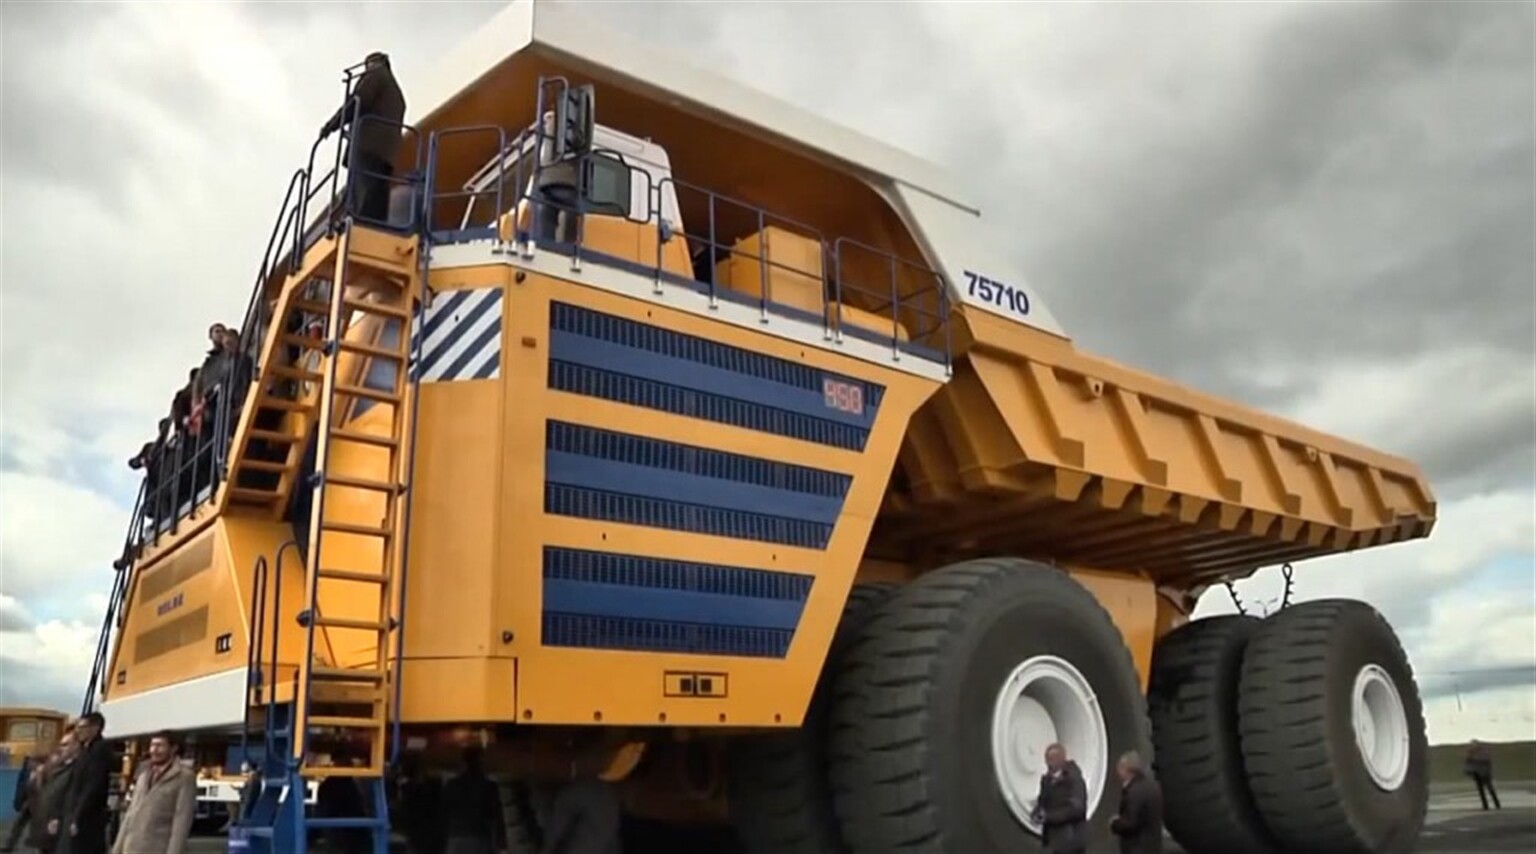 Largest dumptruck could be a record breaker